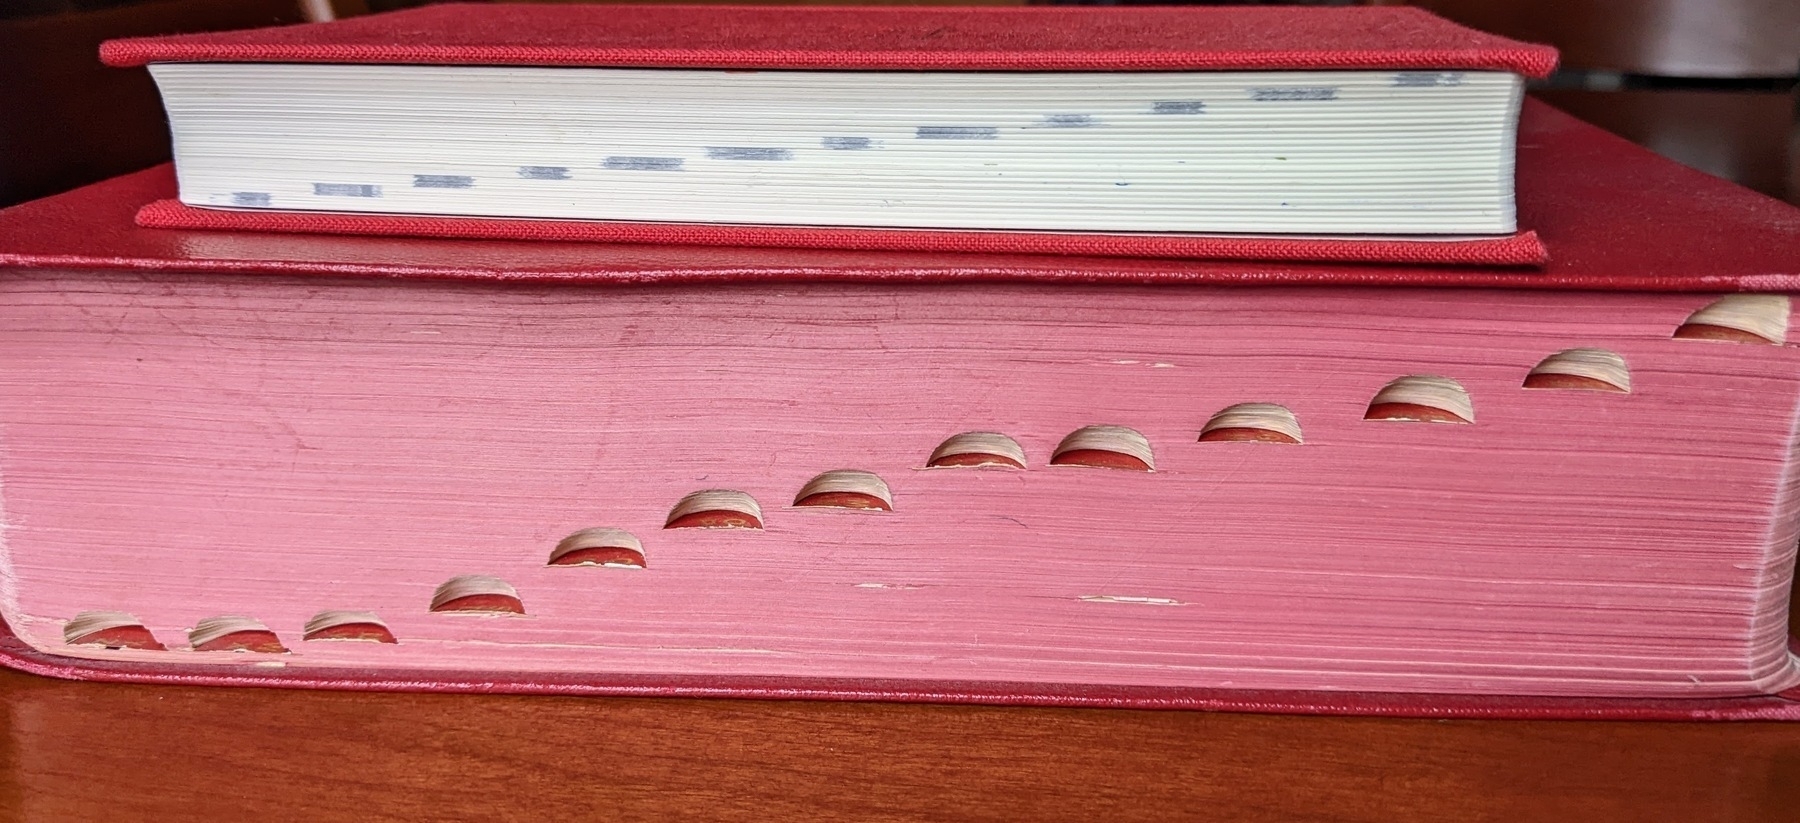 two books stacked on each other, showing fore-edge indexes